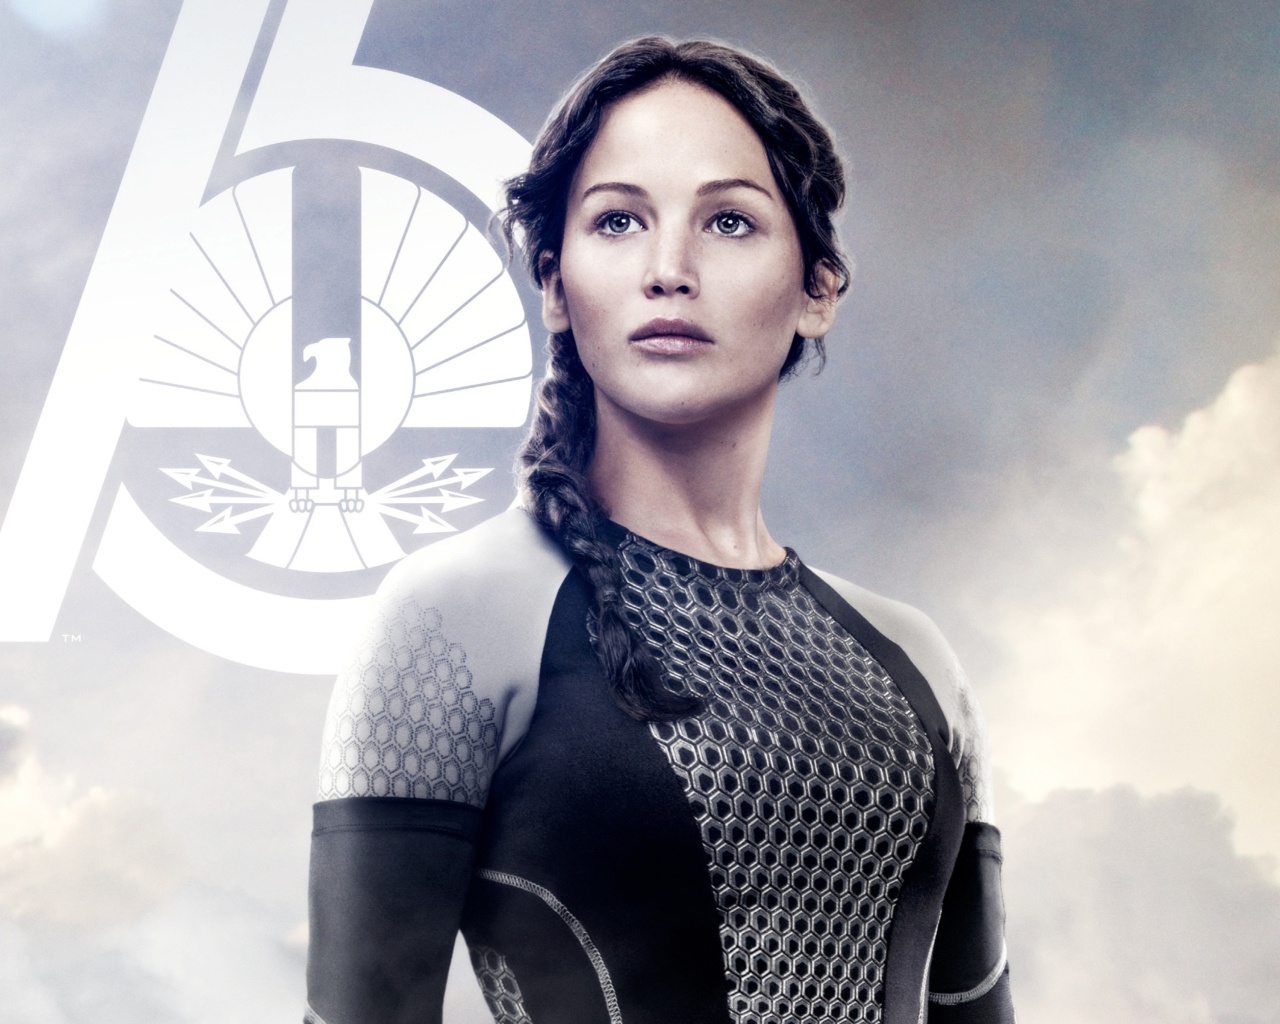 Jennifer Lawrence In The Hunger Games Catching Fire screenshot #1 1280x1024